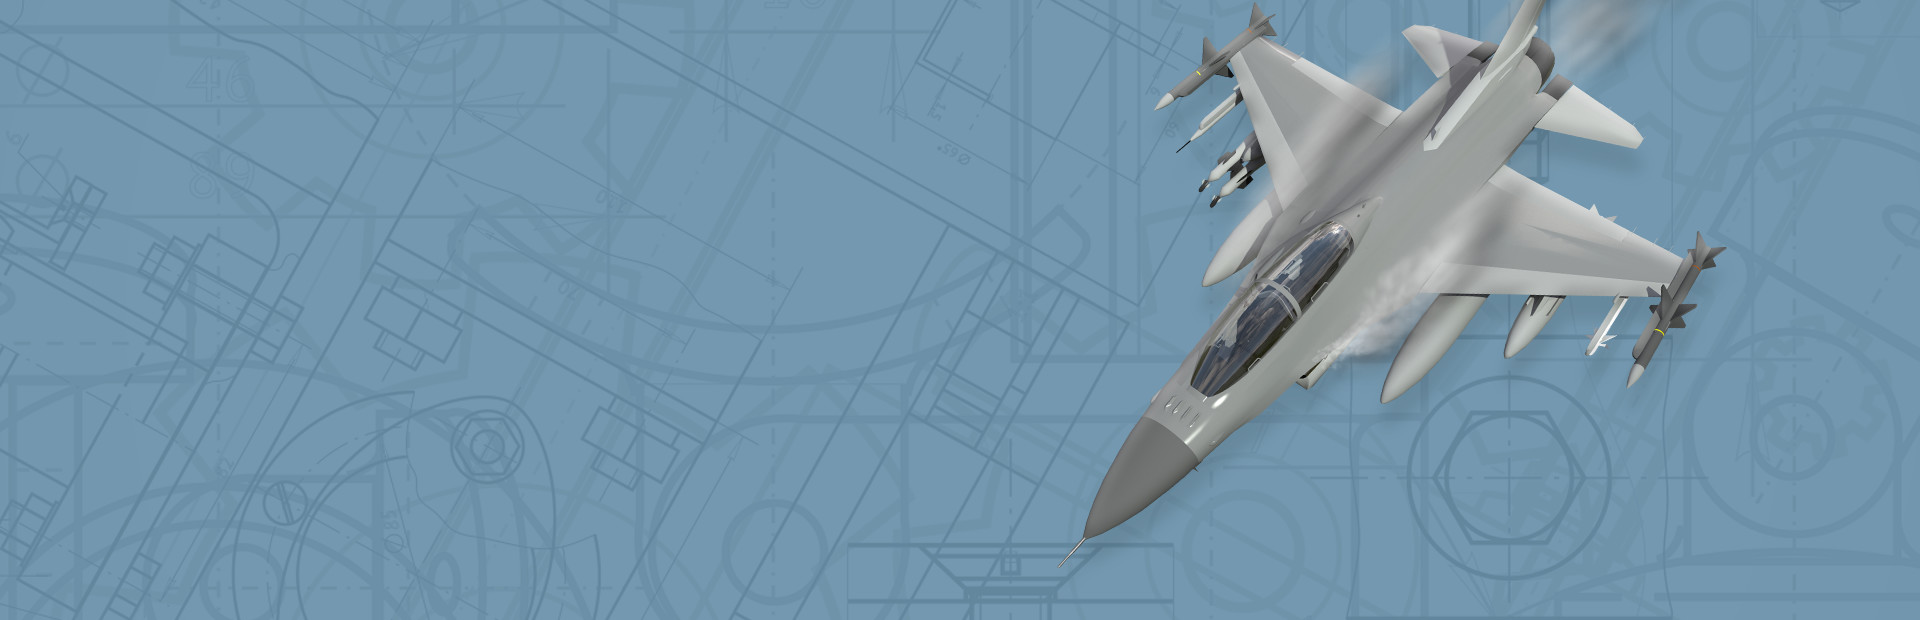 F-16 Multirole Fighter cover image